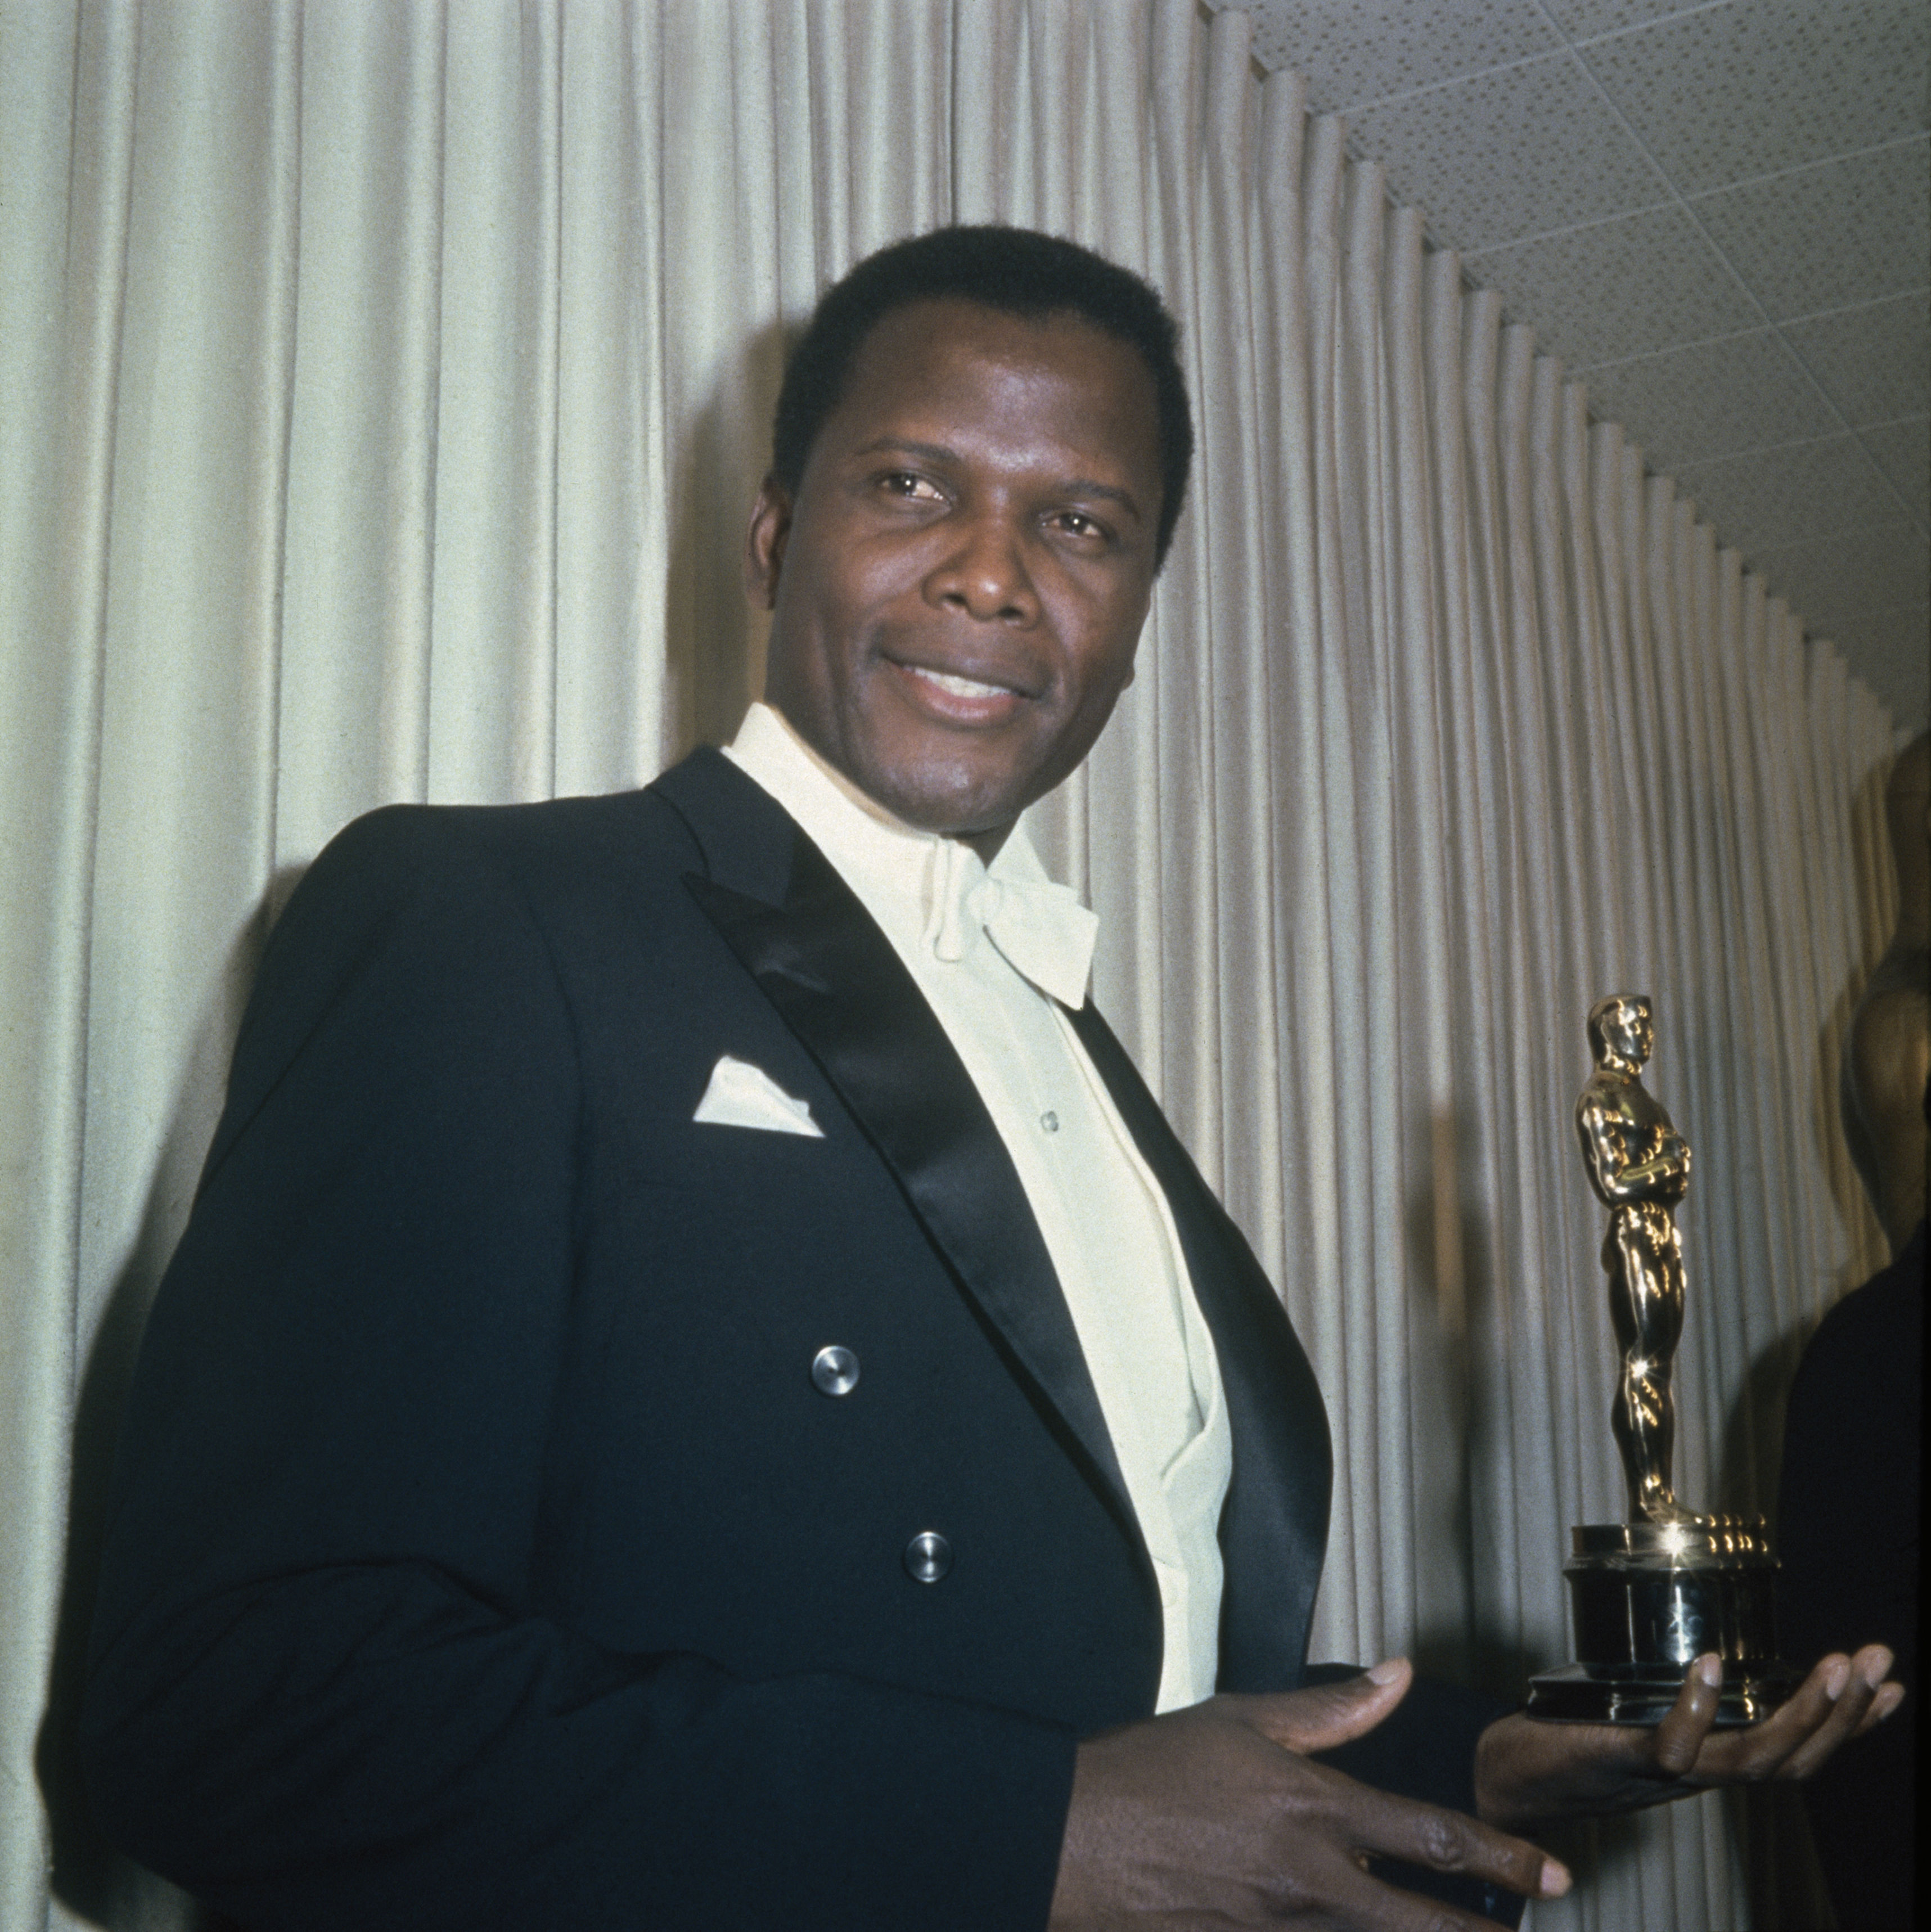 <p>Sidney Poitier became the first Black performer to win an Academy Award for best actor when he took home the prize for his work in "Lilies of the Field" in 1964.</p>